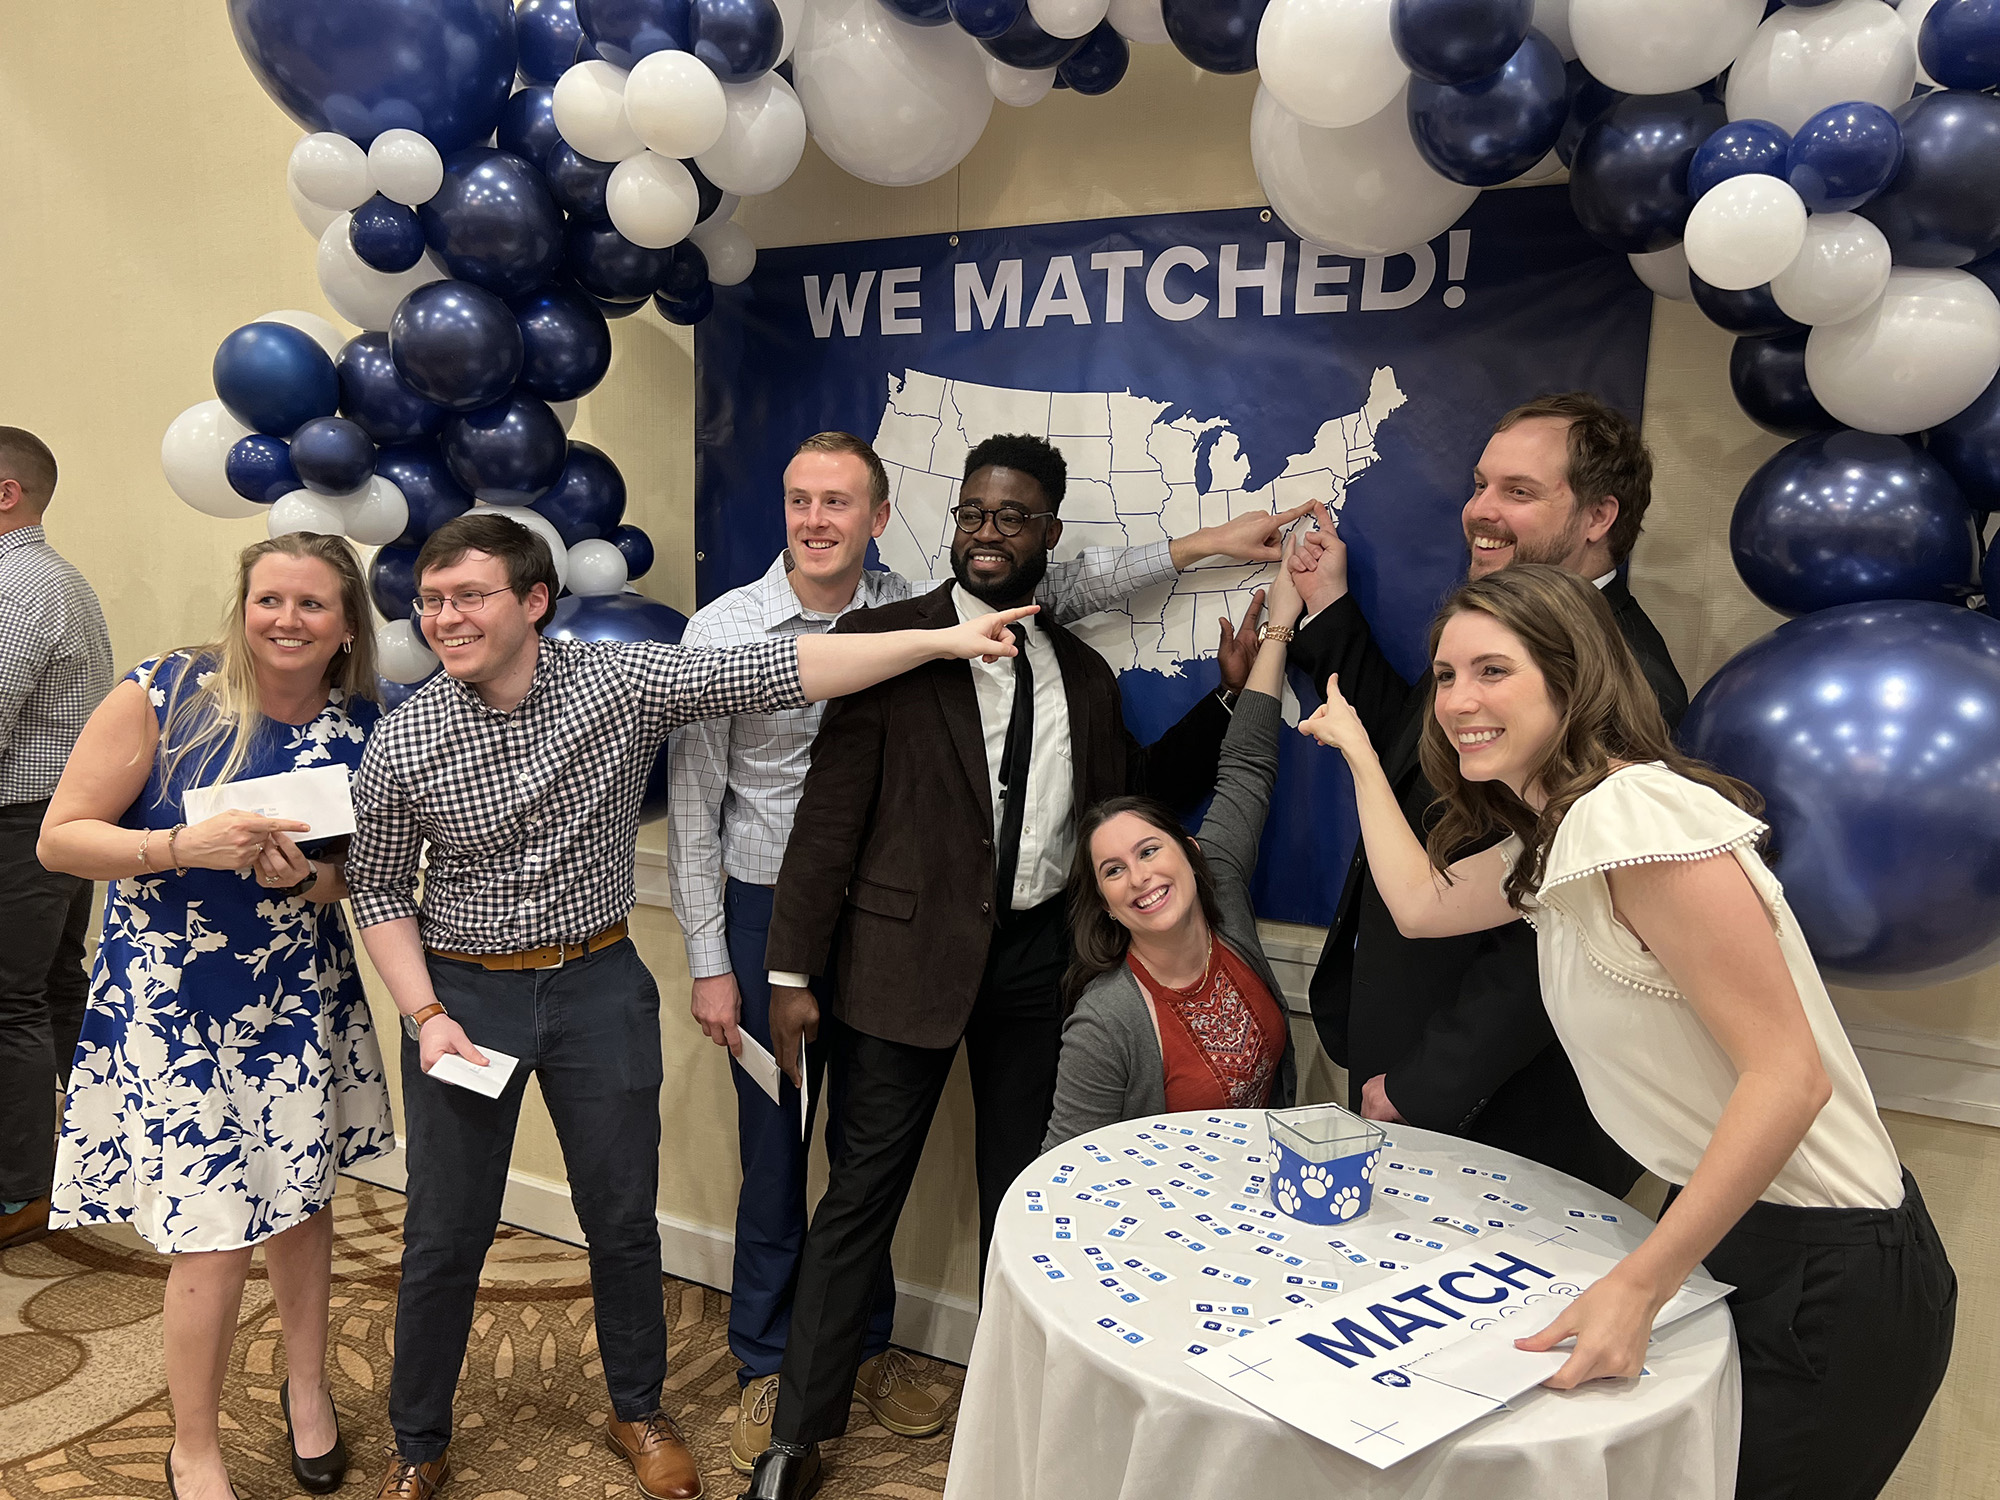 Matching MD students point toward a poster that says We Matched! with a U.S. map on it, with an arch of blue and white balloons above them. 